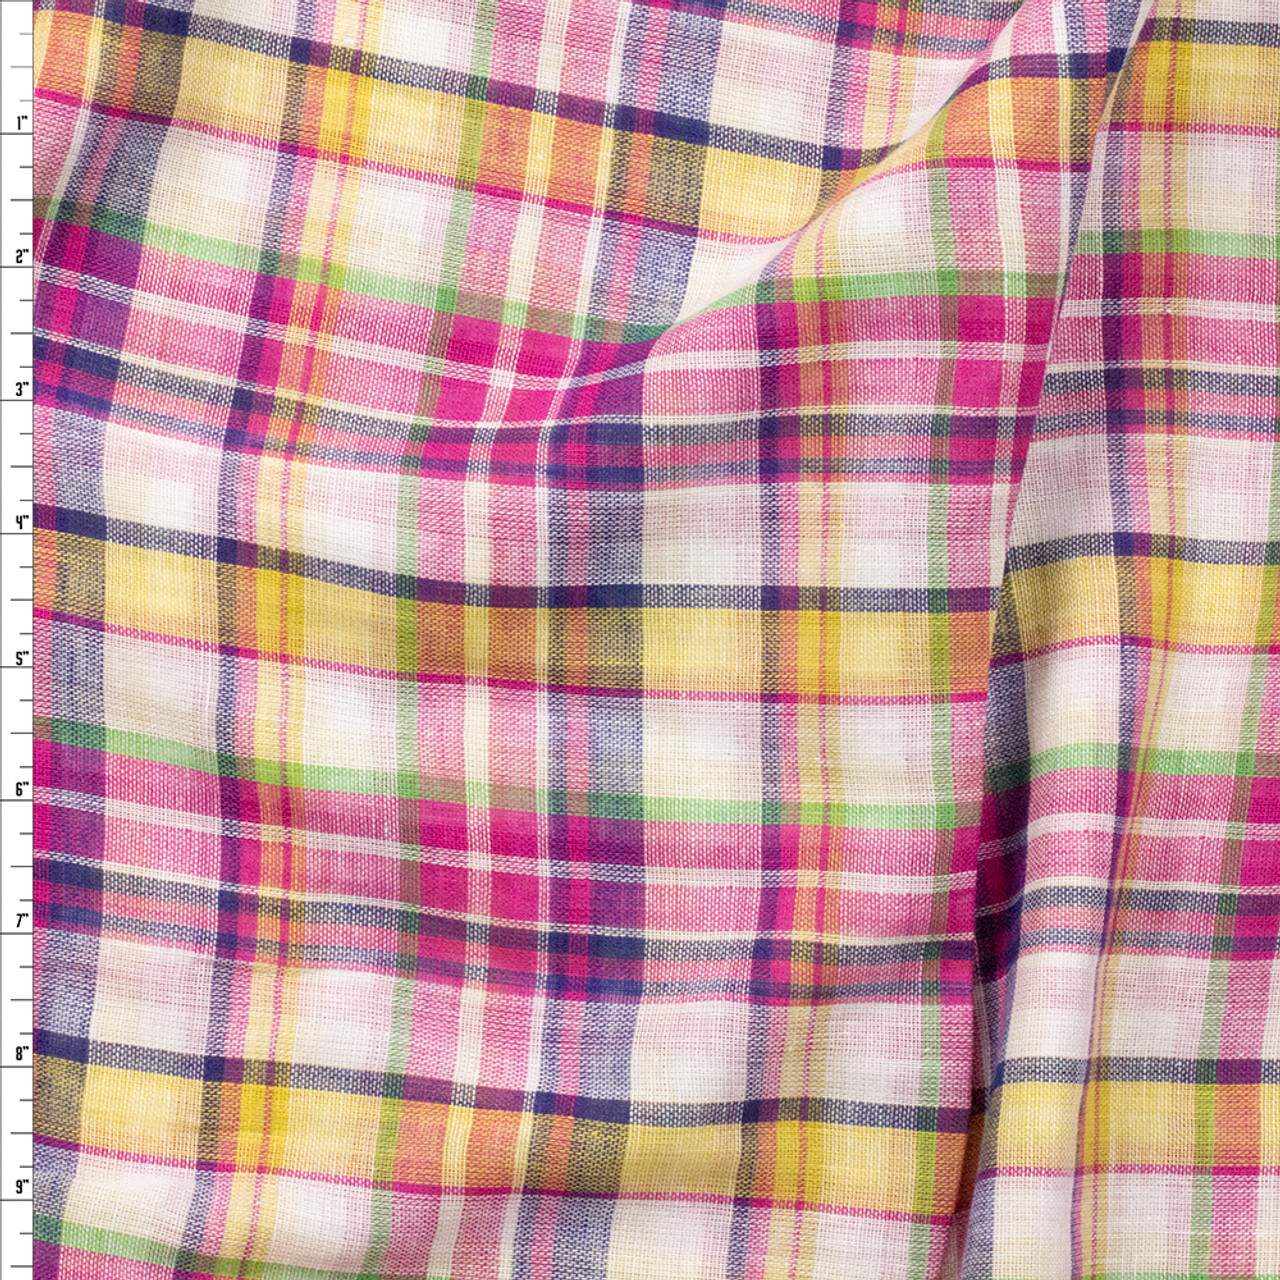 Hot Pink, Turquoise, and Yellow Plaid Reversible Double Gauze